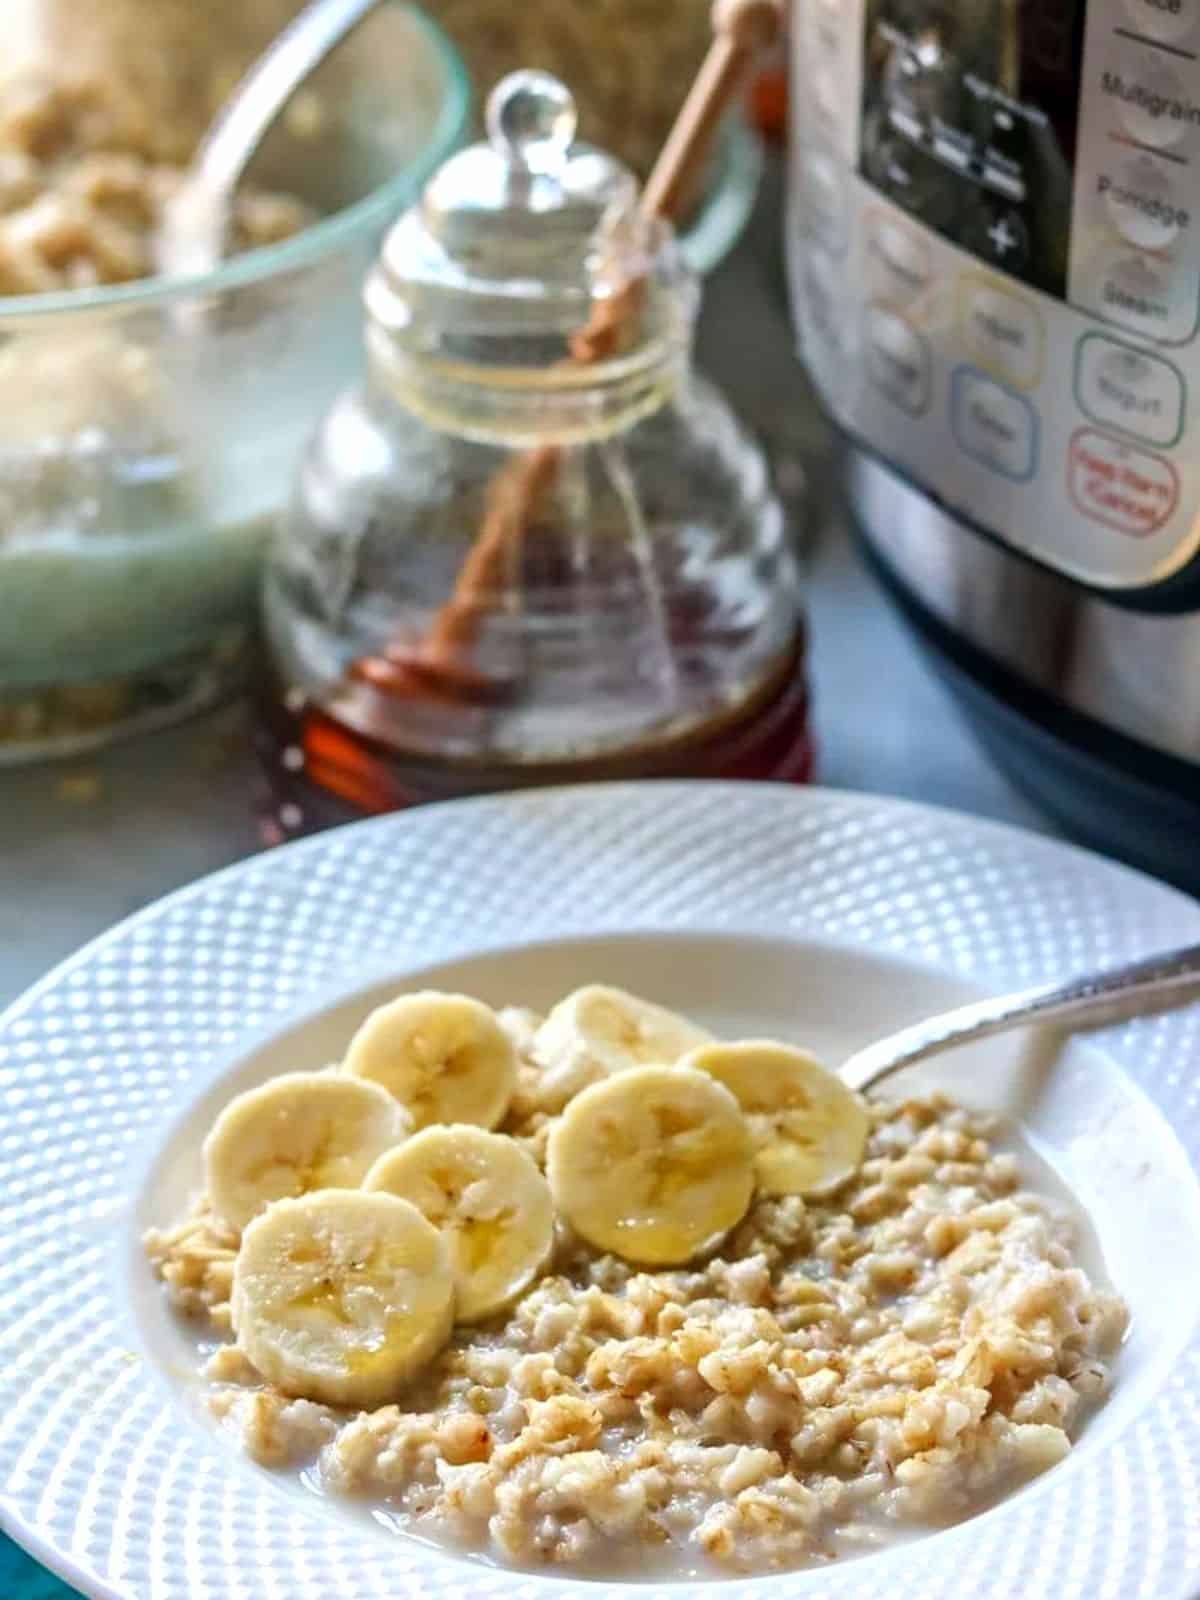 Bowl of Oatmeal next to instant pot.